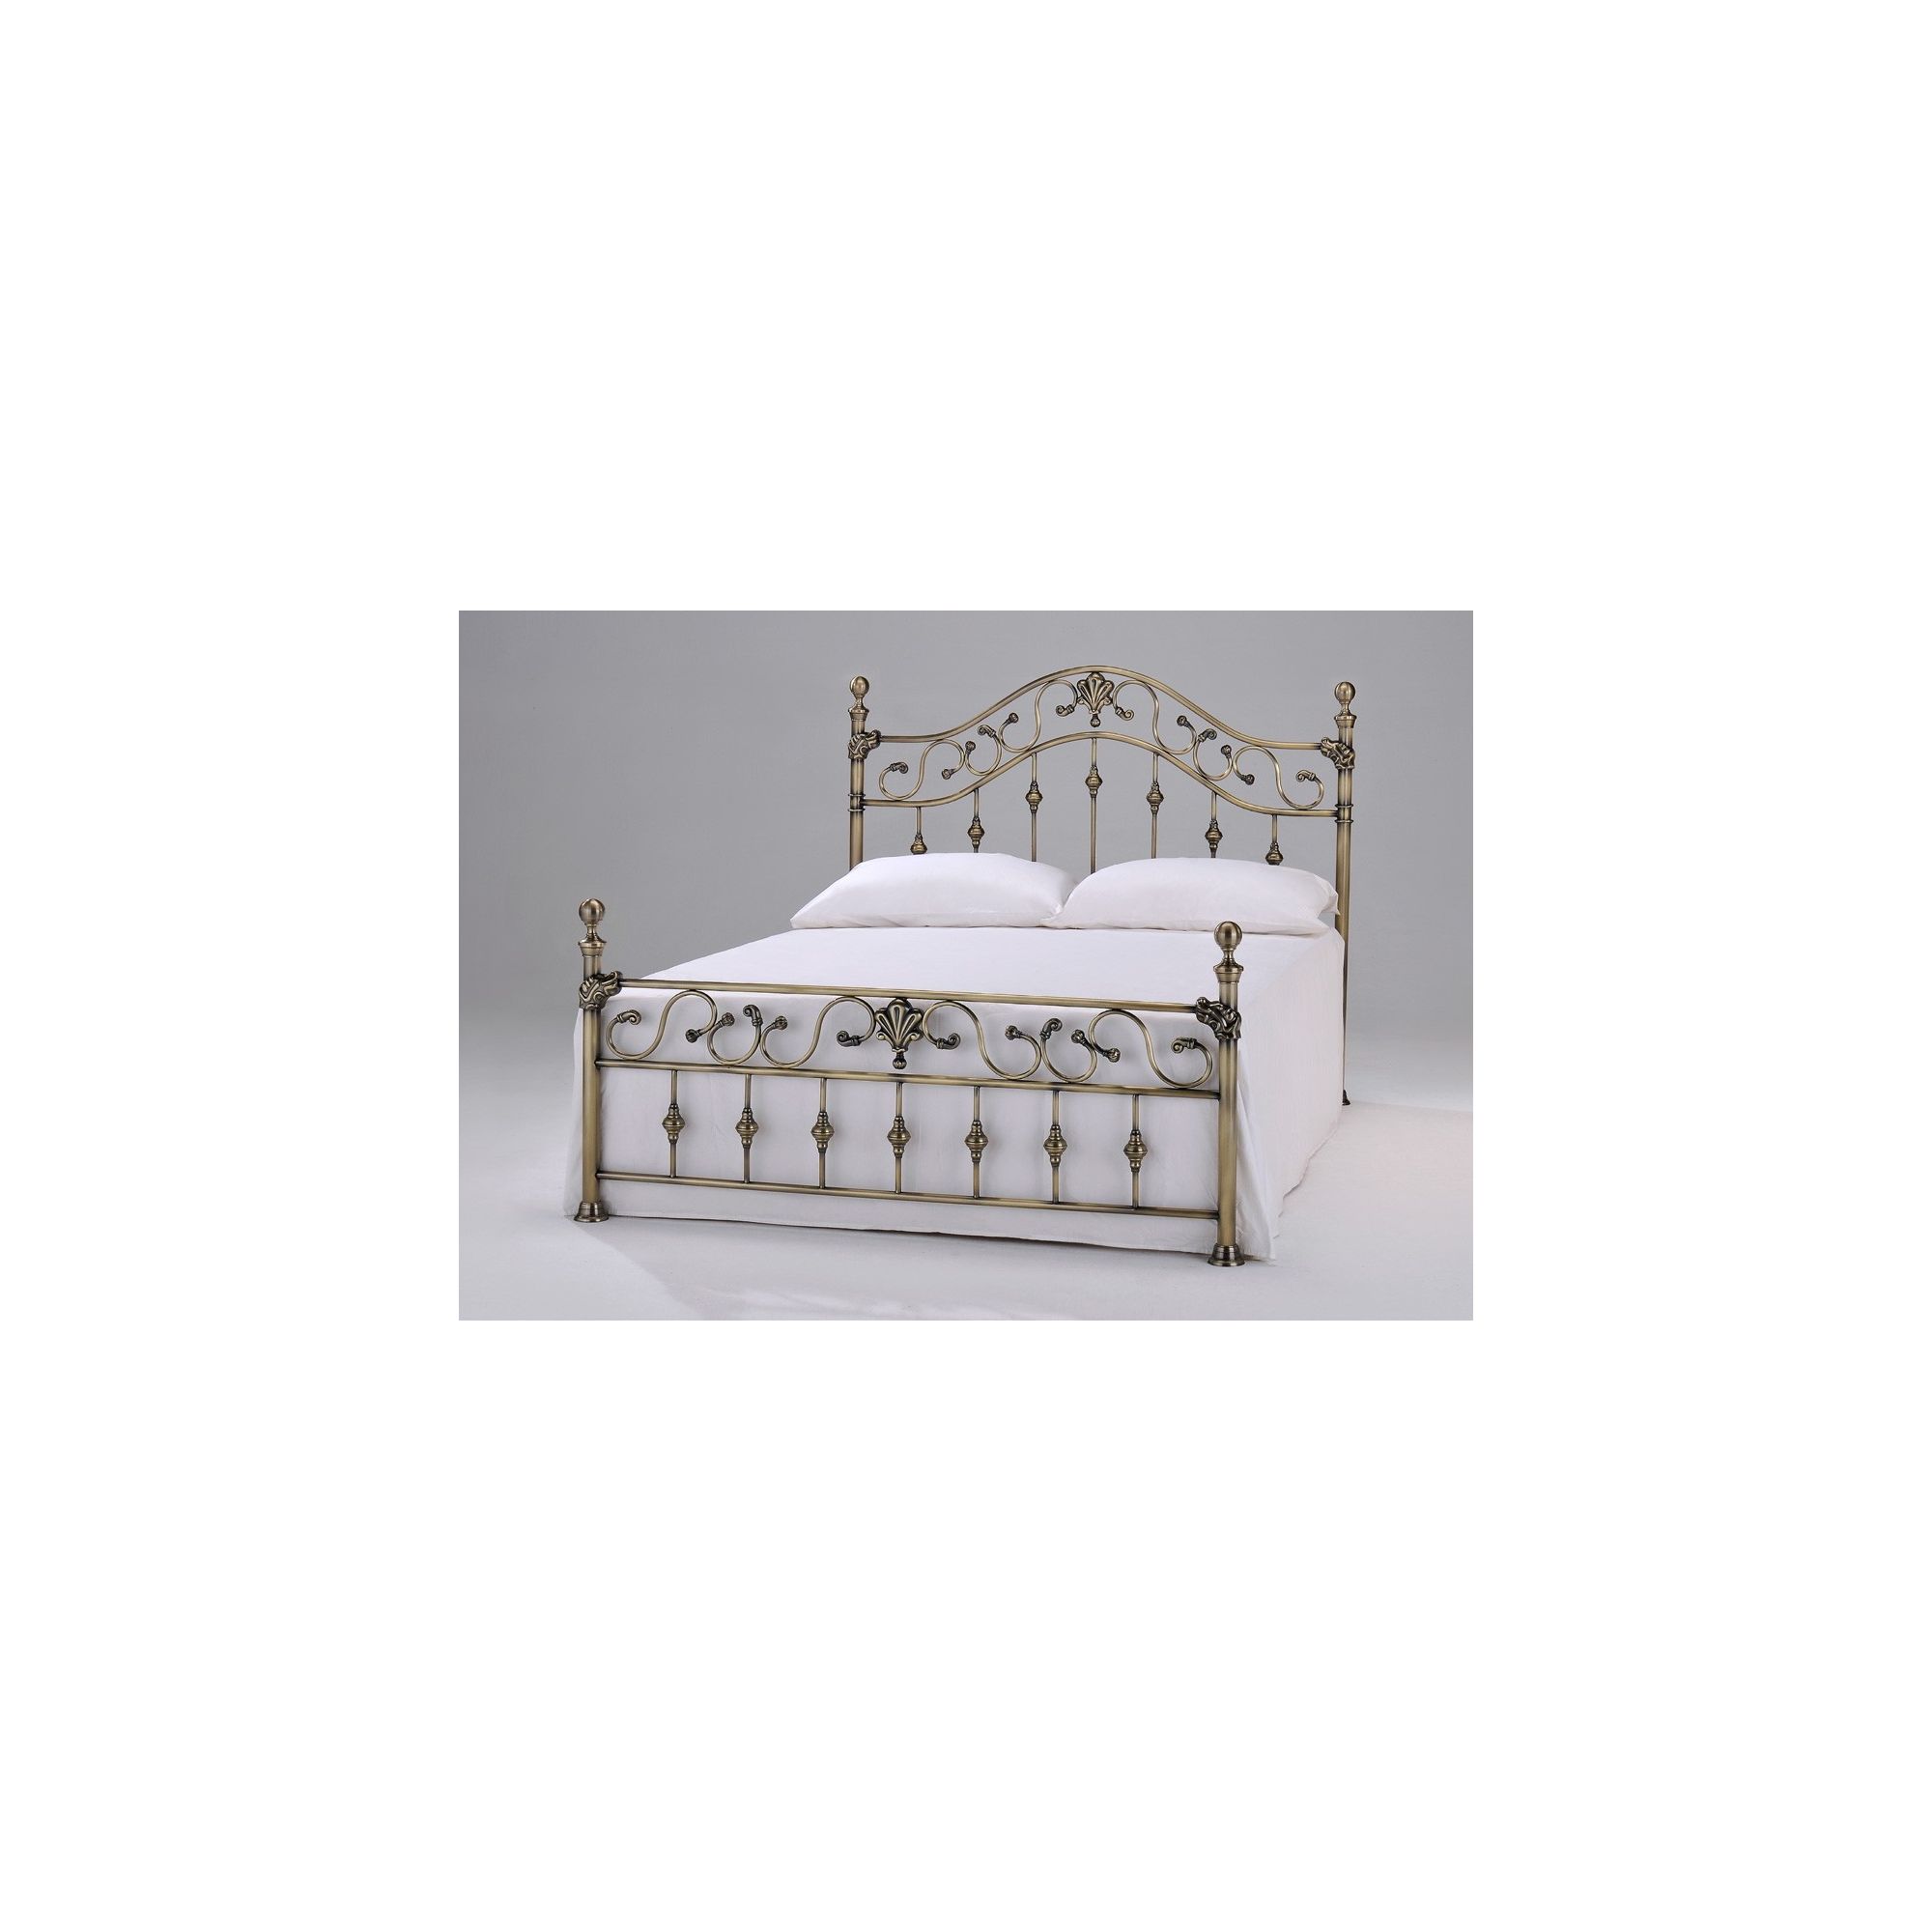 Interiors 2 suit Elizabeth Brass Bed - King - Brass at Tescos Direct